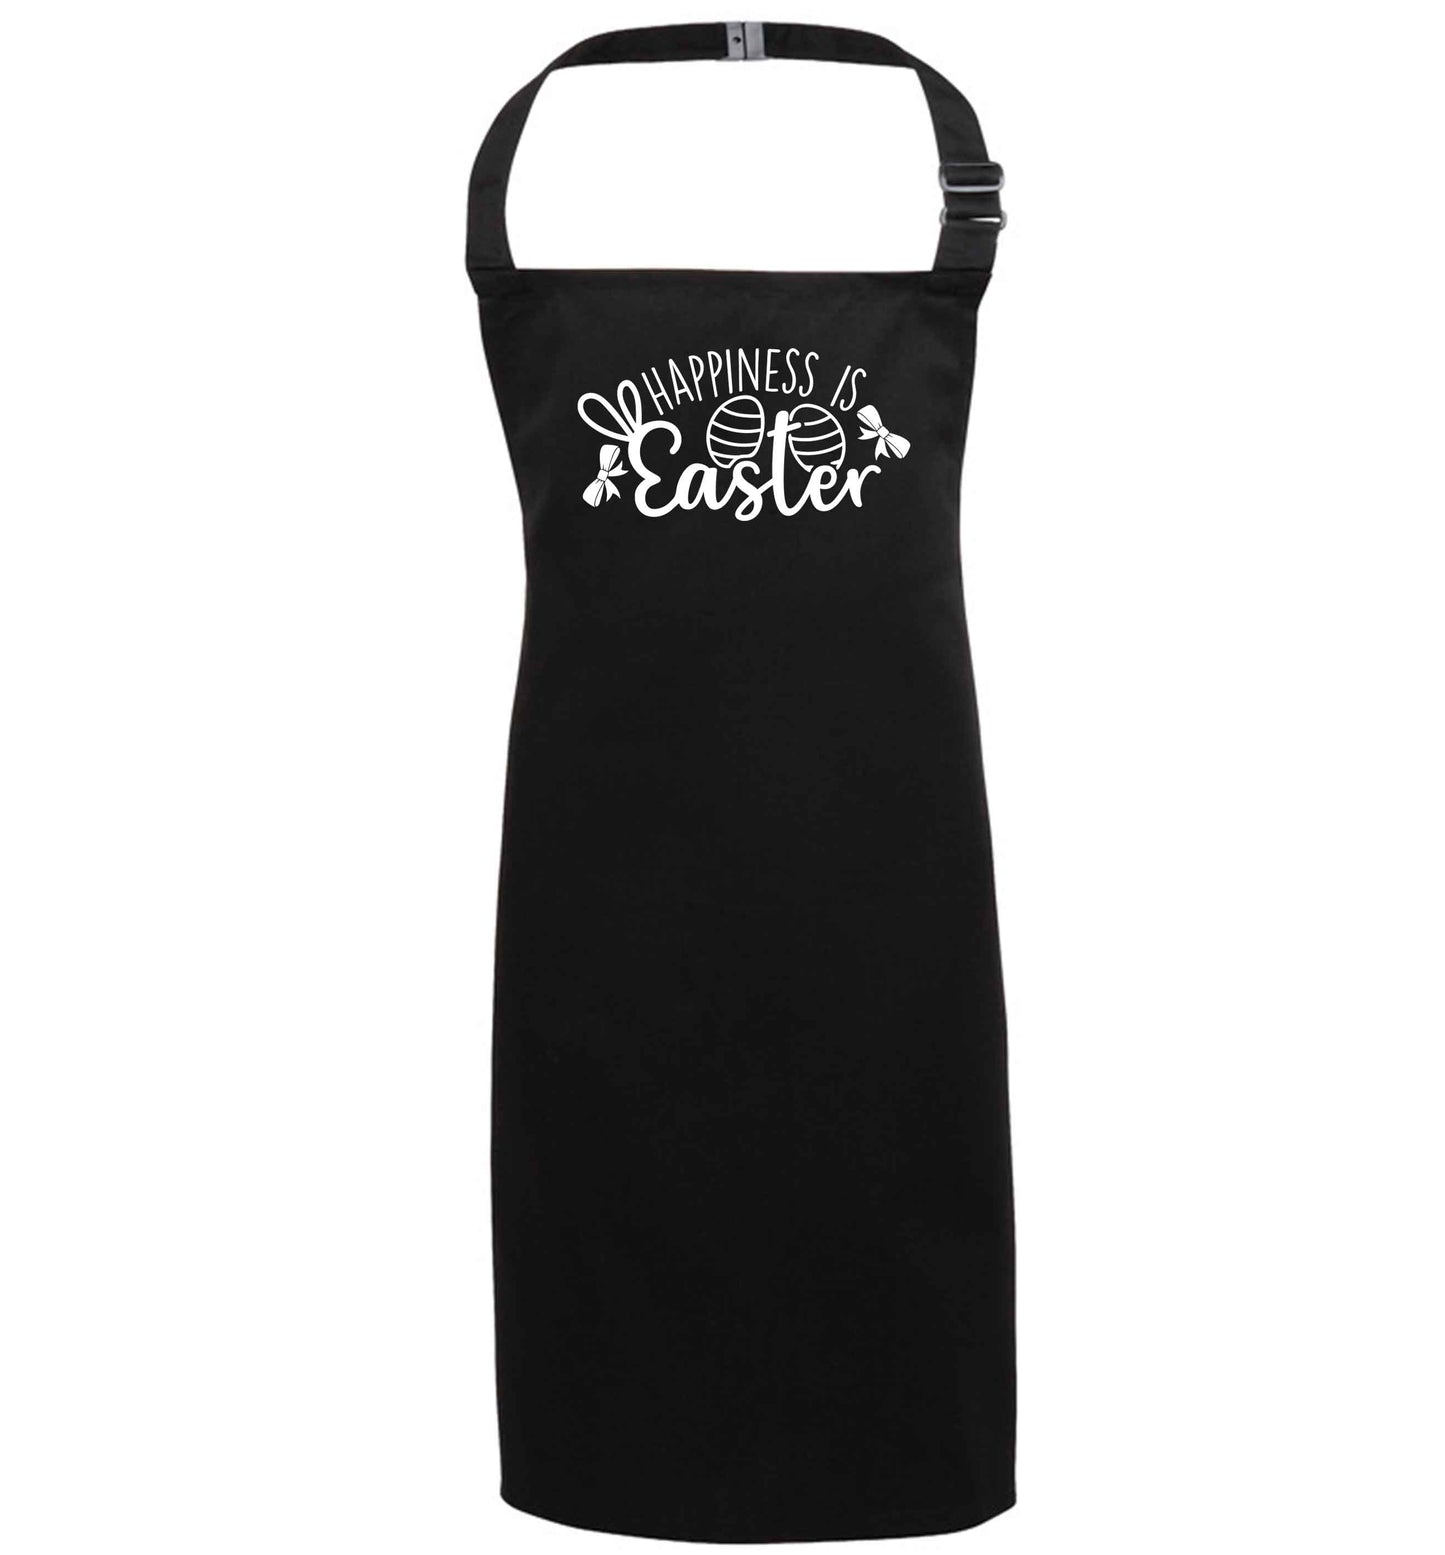 Happiness is easter black apron 7-10 years